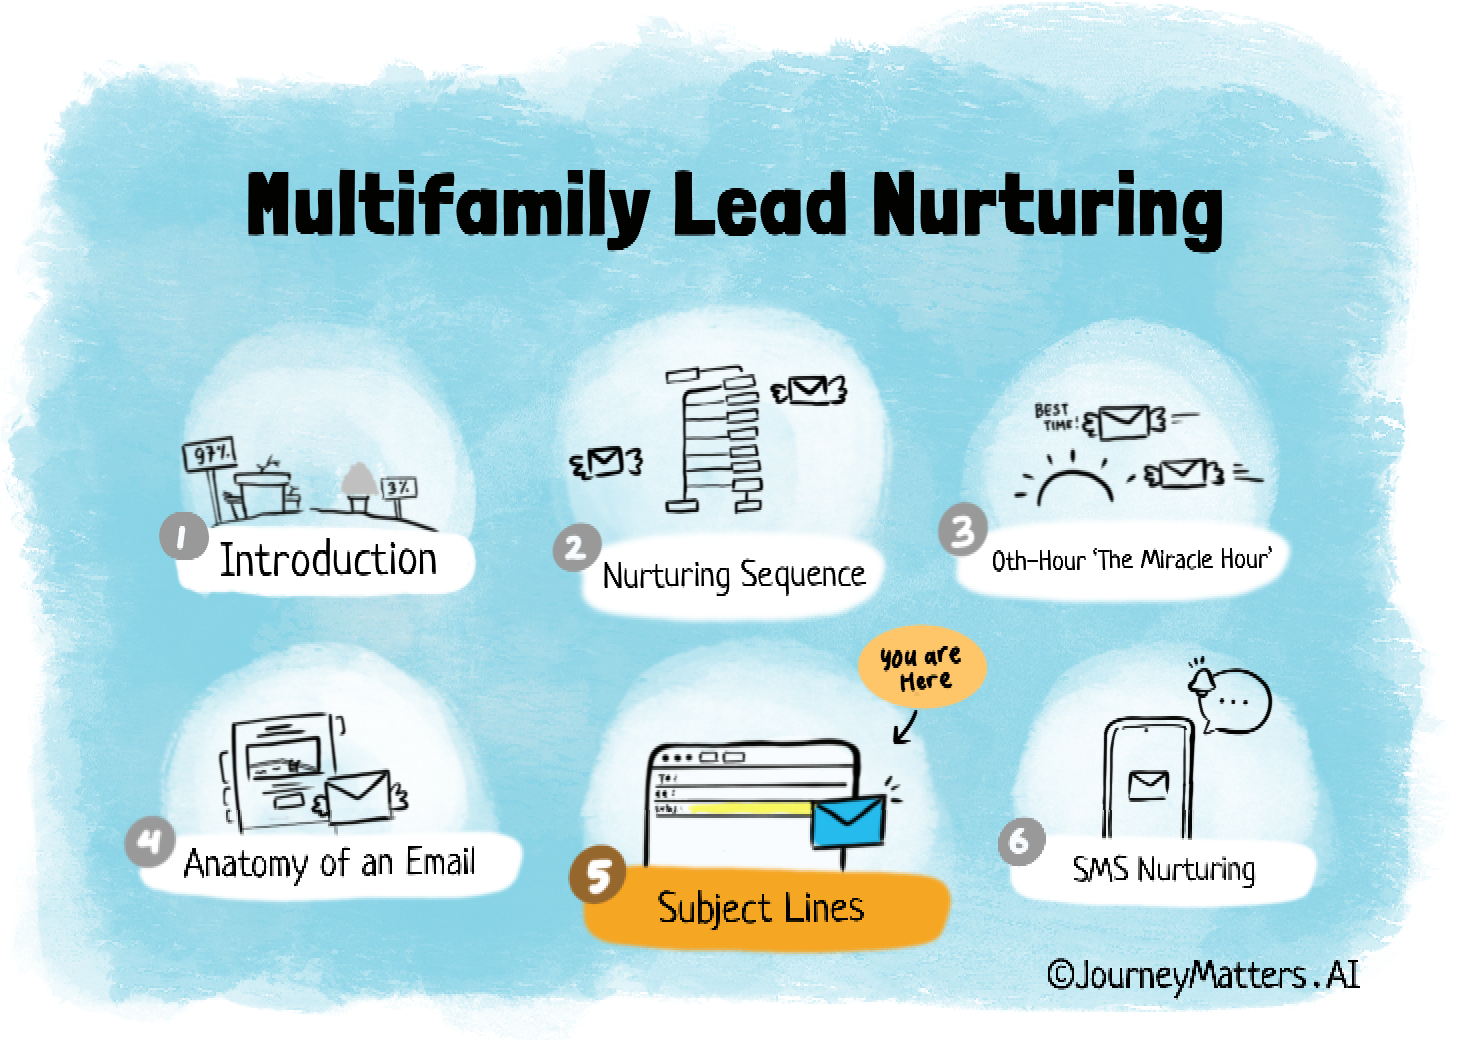 Mulitfamily lead nurturing series image: Crafting Subject Lines that Prospects Open